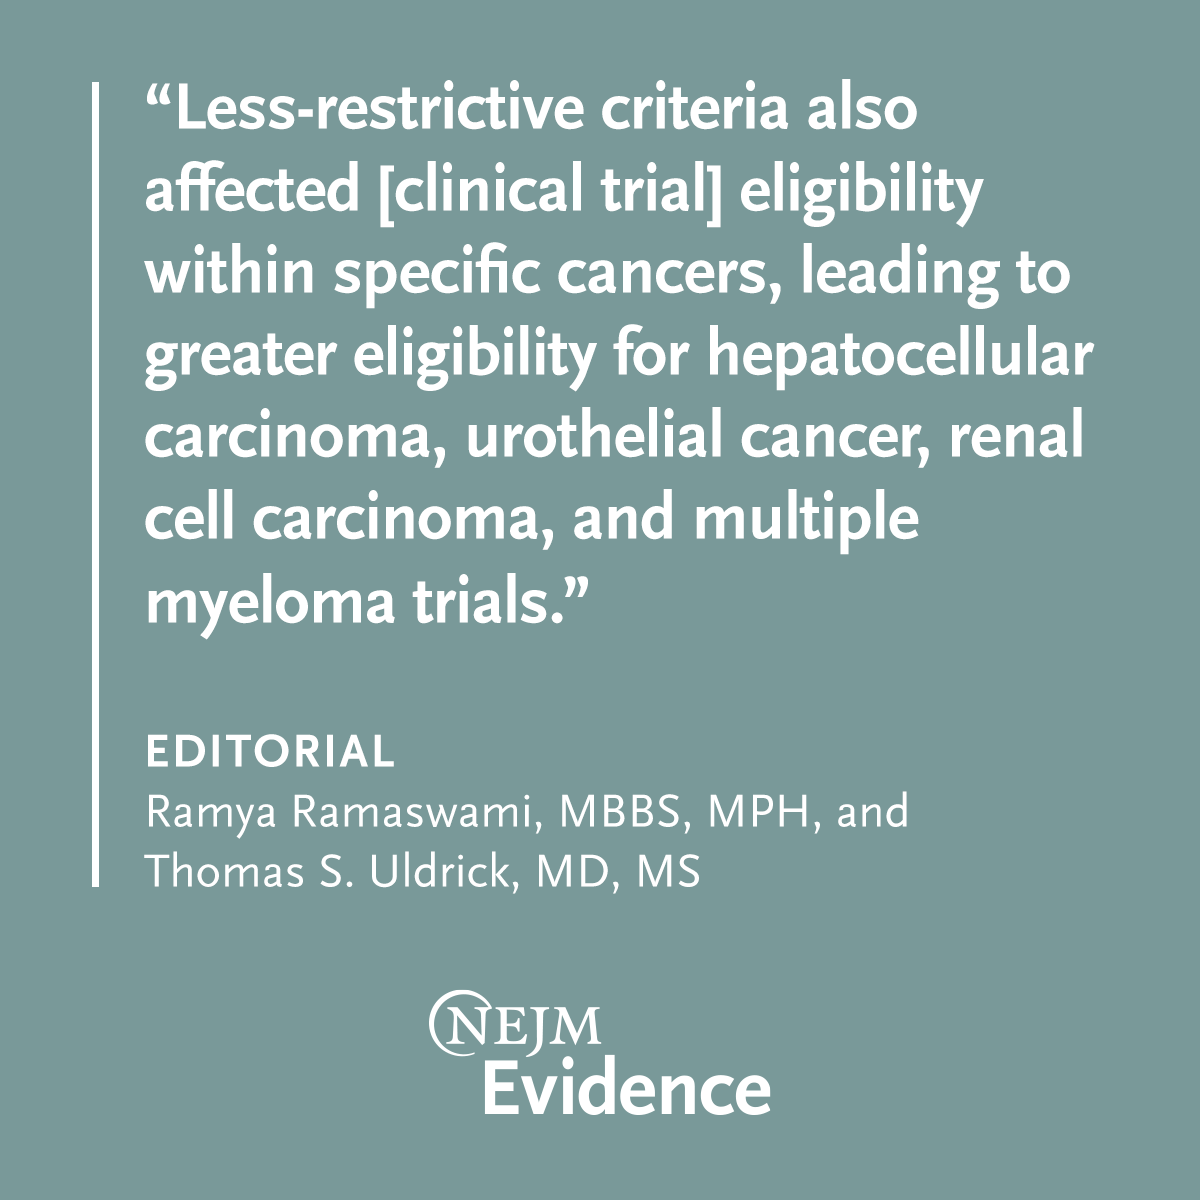 Editorial: “Reflecting the Real World of Cancer Care — The Impact of Broadening Trial Eligibility” by Ramya Ramaswami, MBBS, MPH, and Thomas S. Uldrick, MD, MS eviden.cc/3x0oYIG